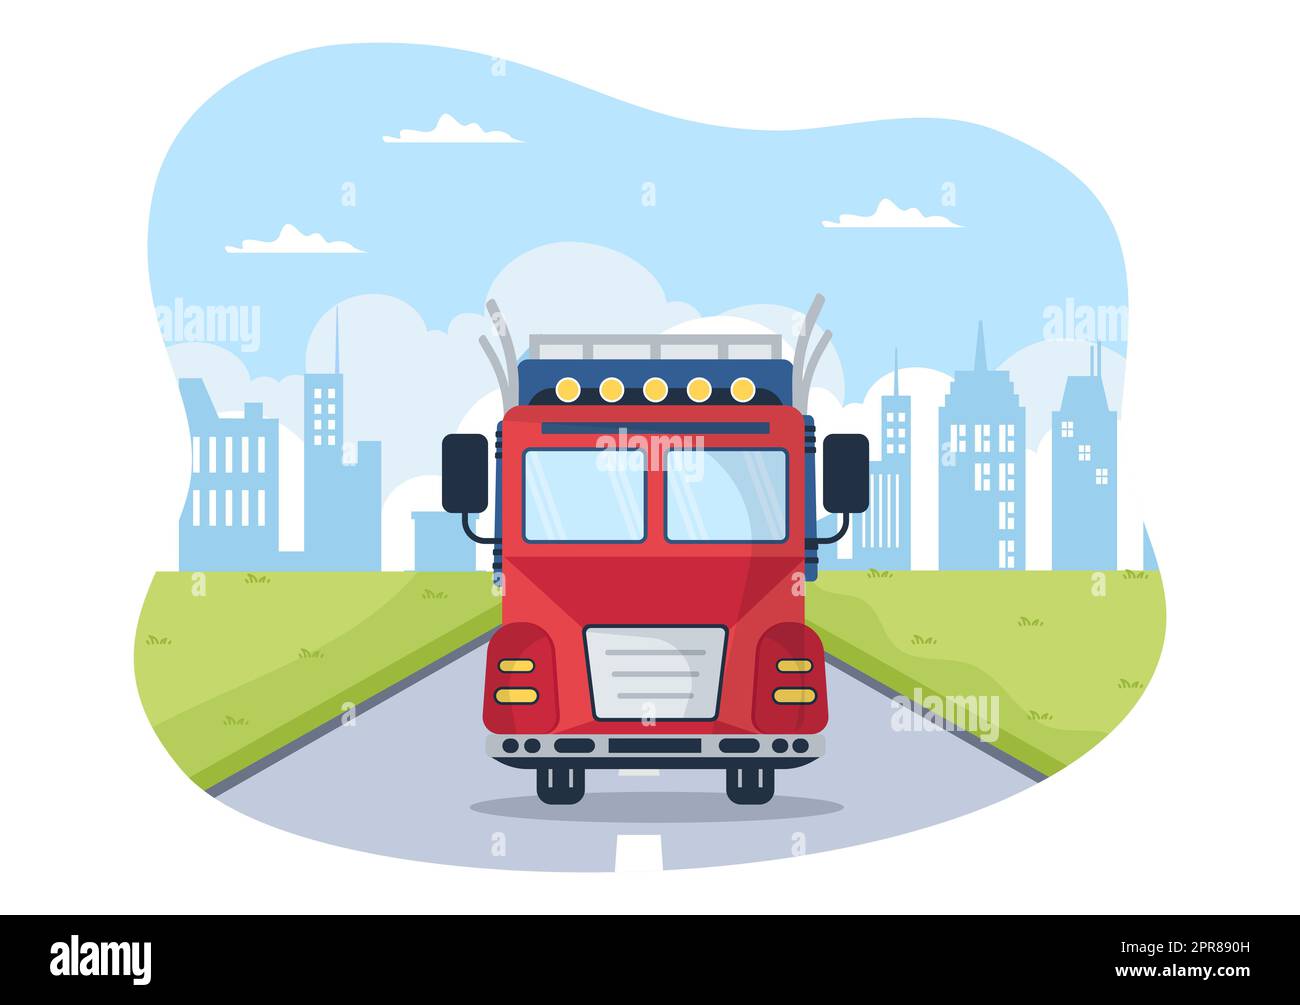 Trucking Transportation Cartoon Illustration with Cargo Delivery Services or Cardboard Box Sent to the Consumer in Flat Style Design Stock Photo